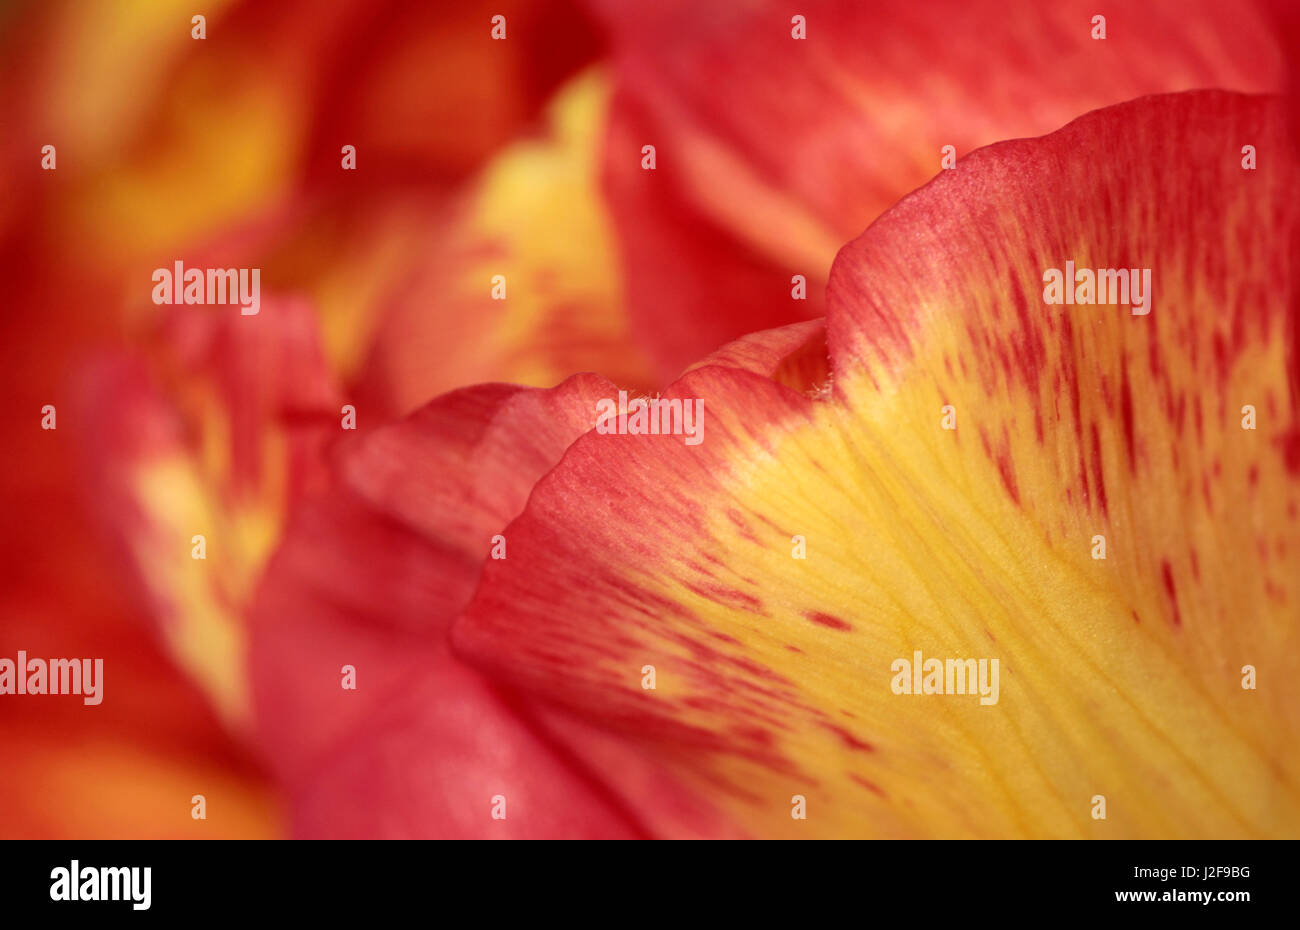 Red and yellow leaf of the flower of a Tulip. Stock Photo